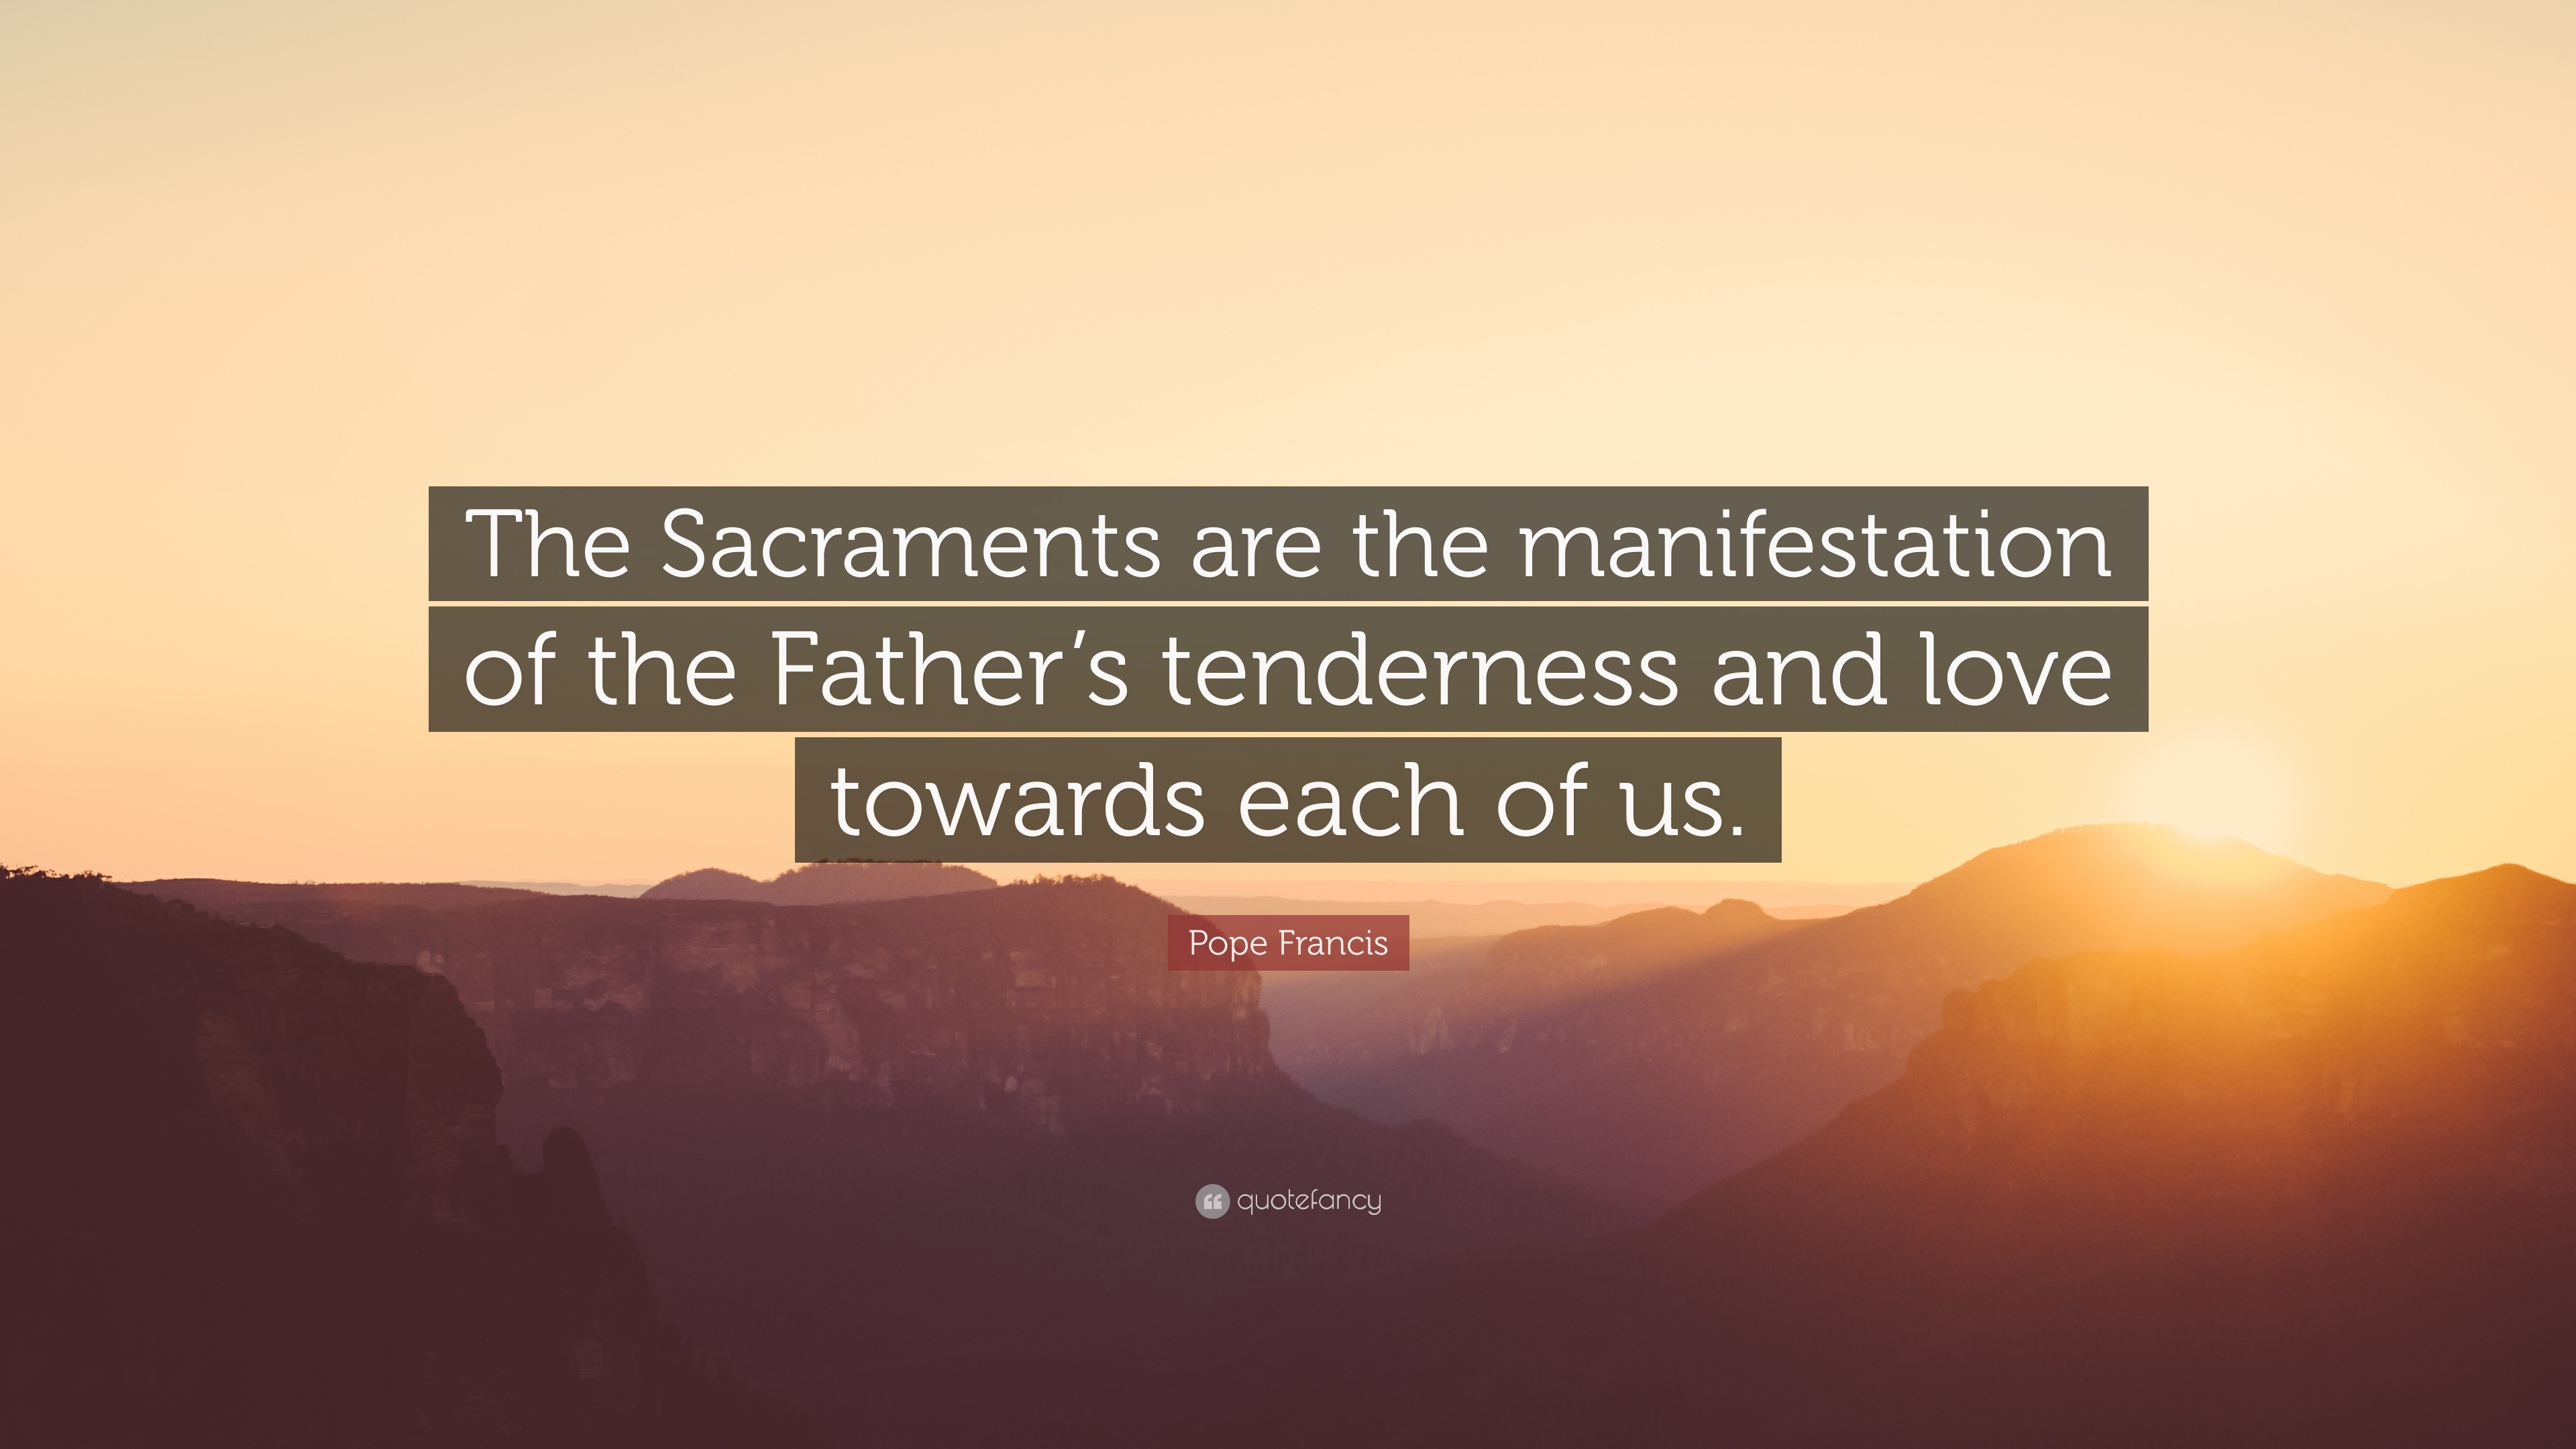 Pope Francis Quote: “The Sacraments are the manifestation of the Father